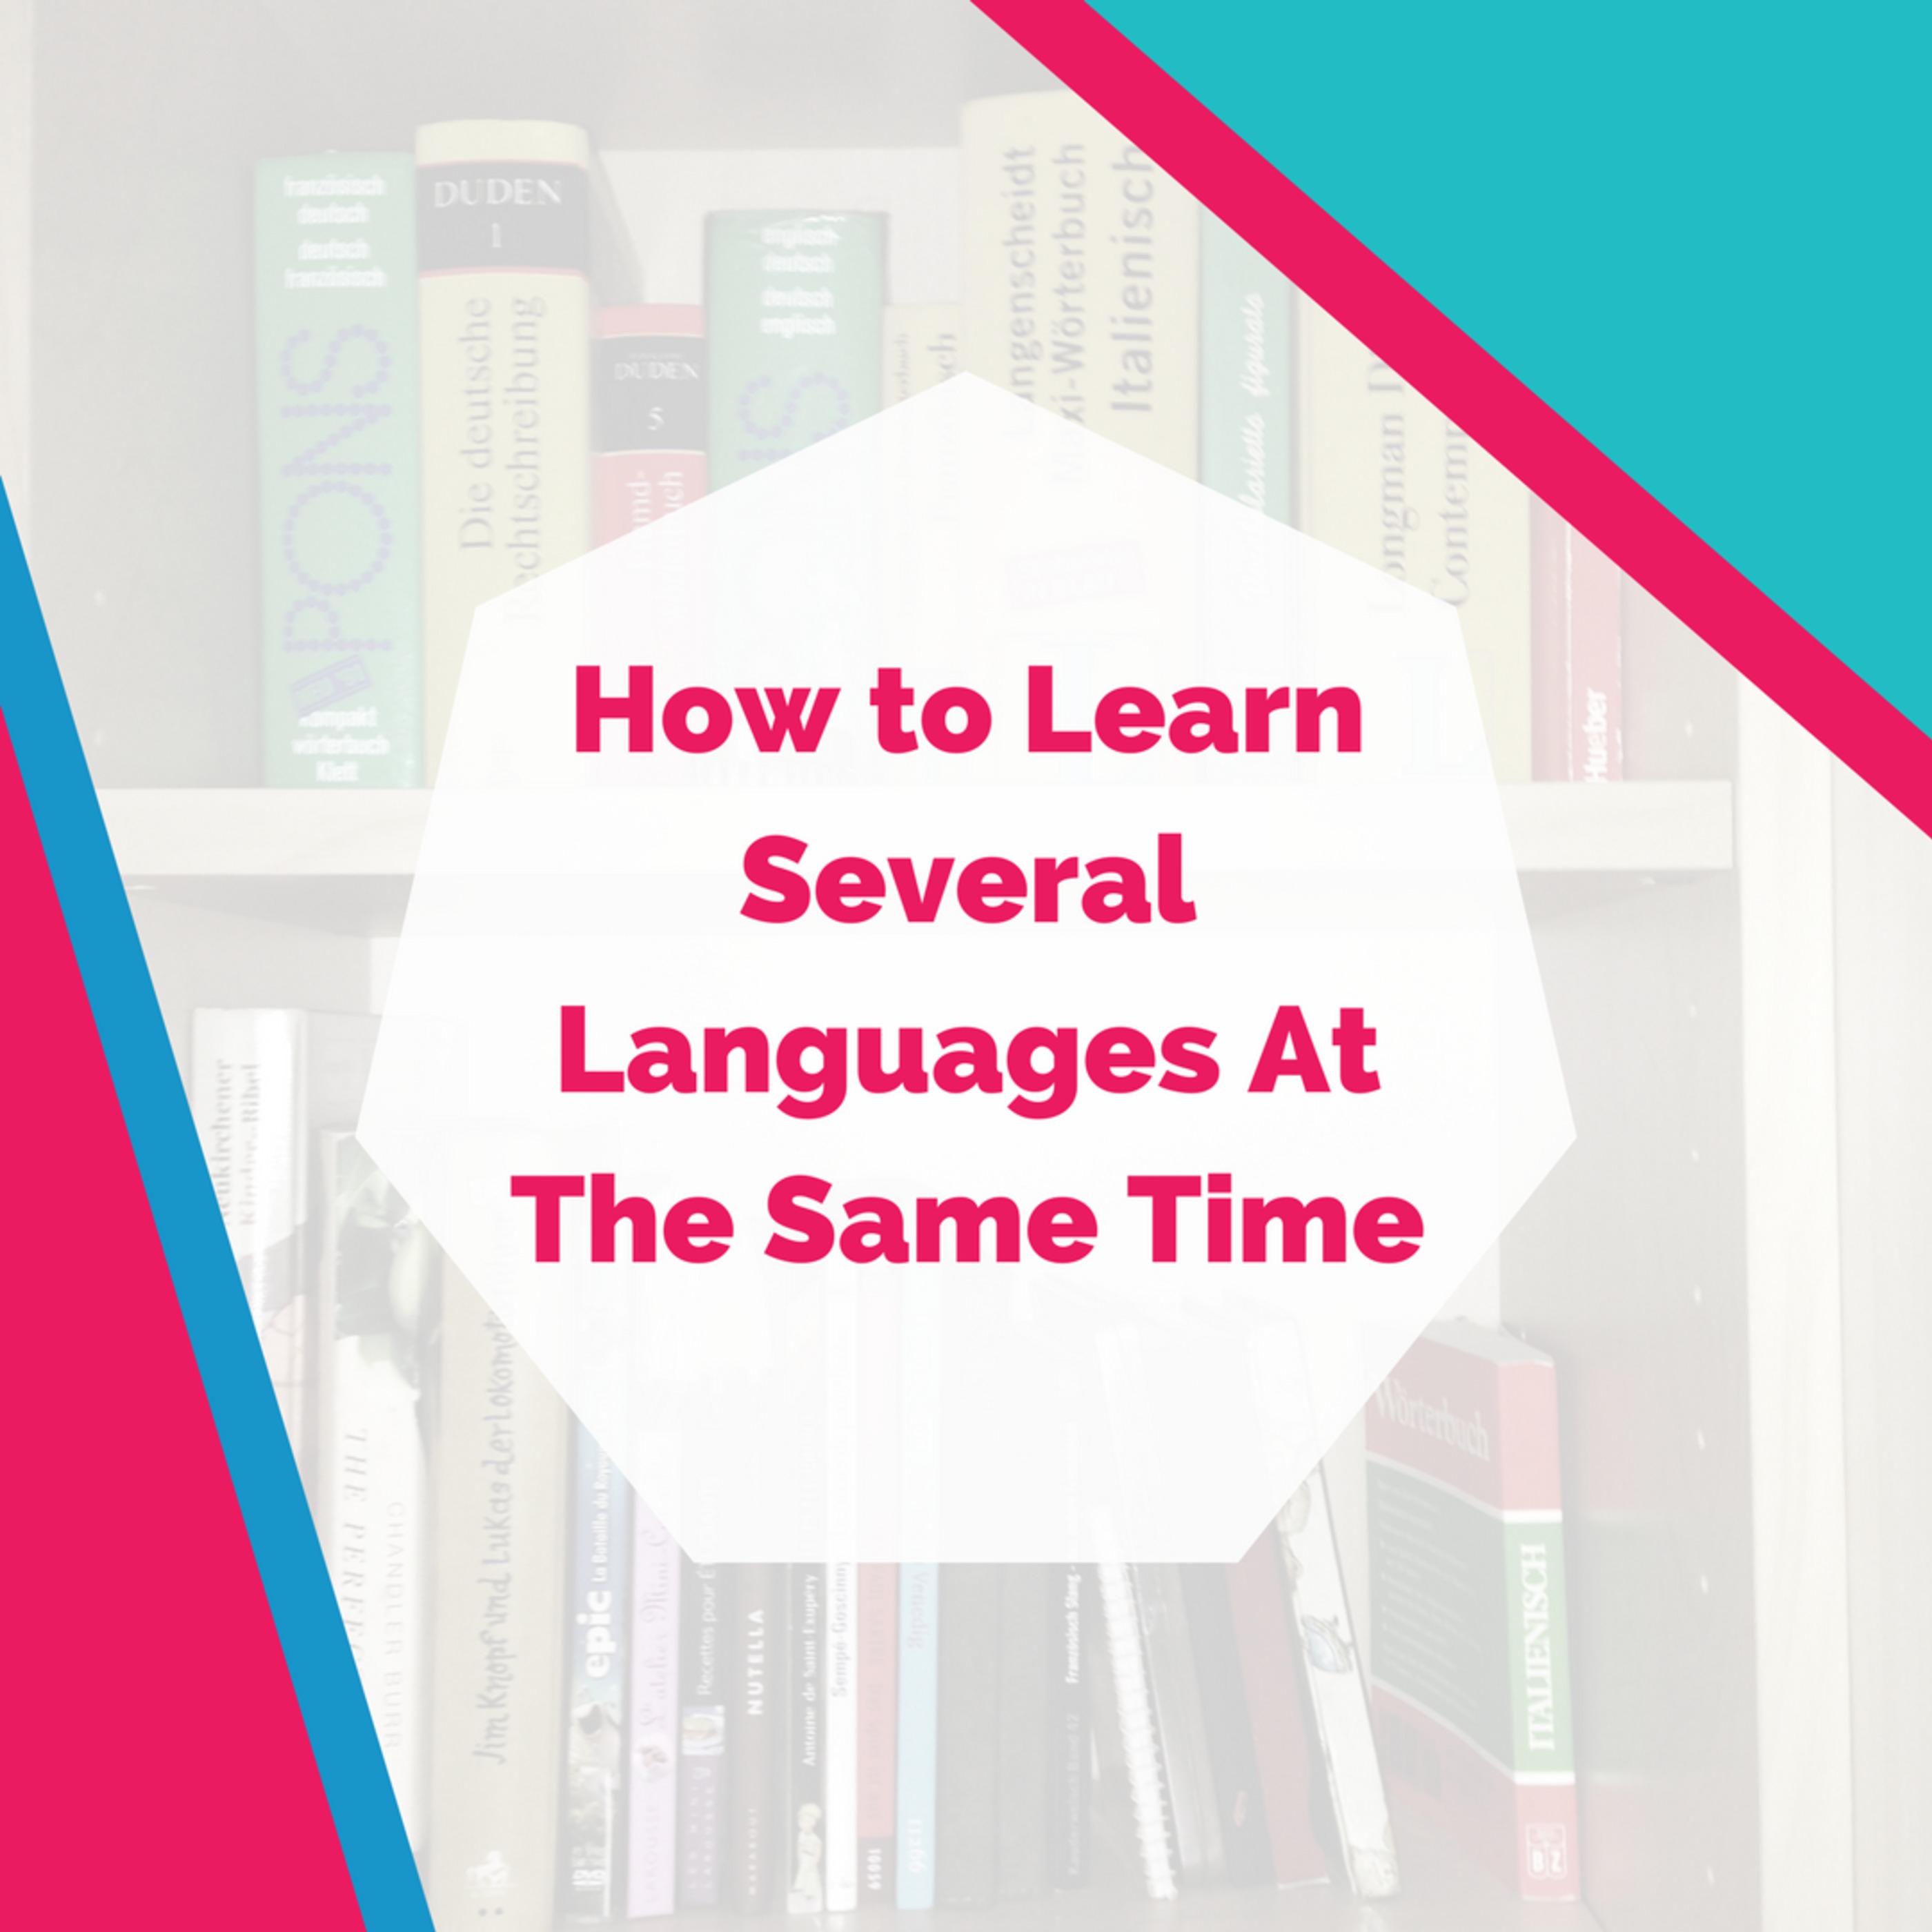 How to Learn Several Languages At The Same Time